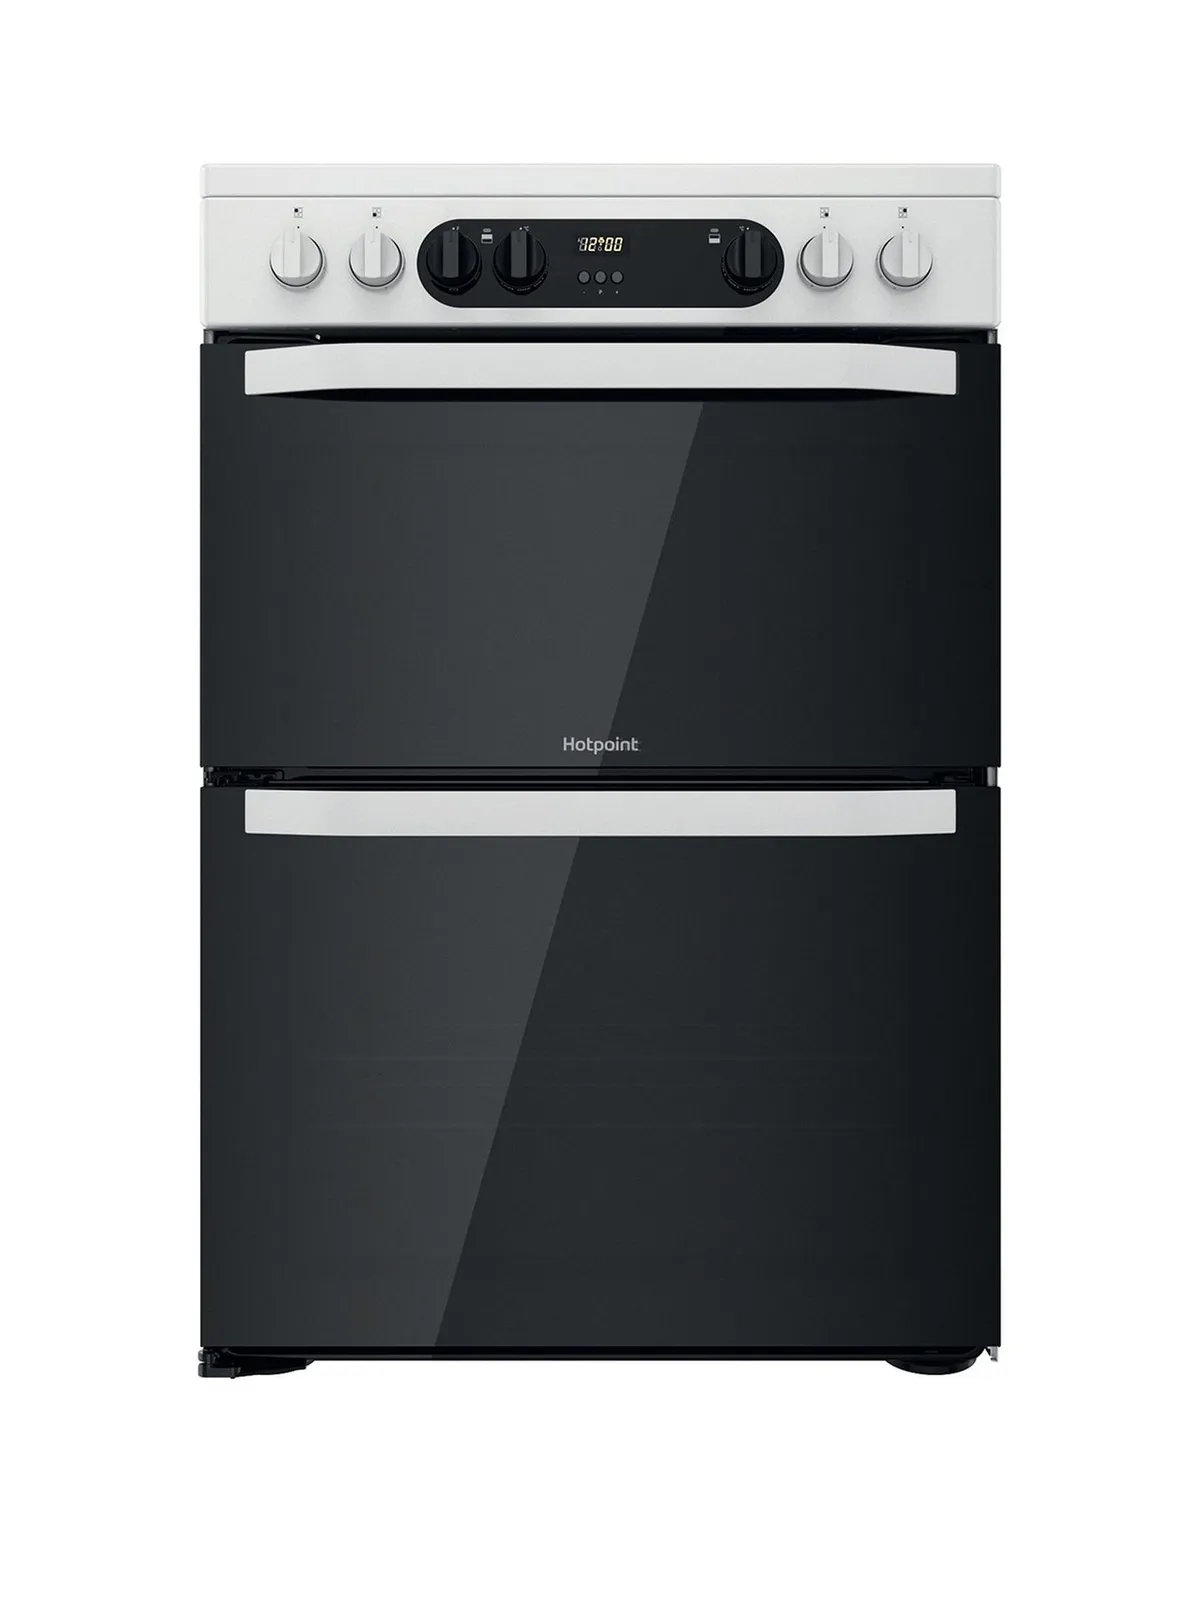 Hotpoint double oven cooker